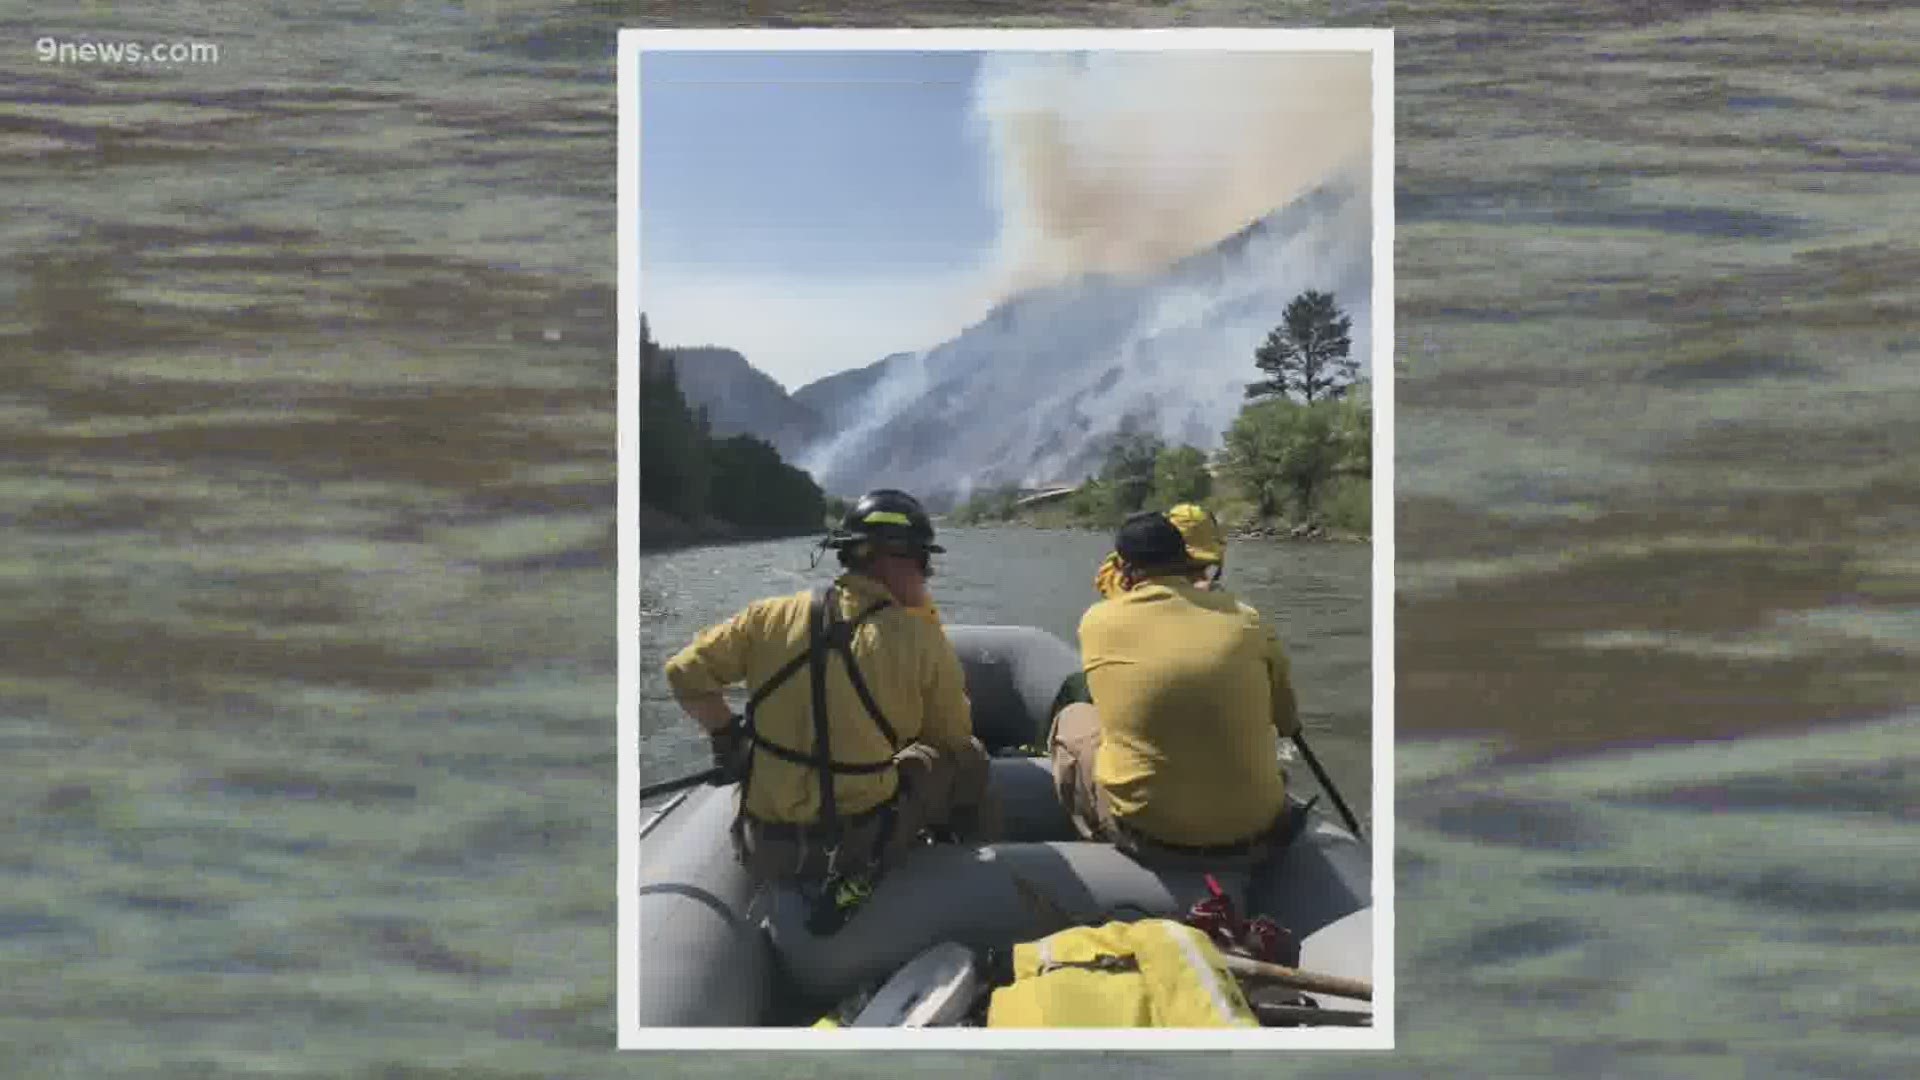 Gregory Cowan’s years as a rafting guide trained him to run his own rafting company. Never did he think those skills would be used to help battle a major wildfire.